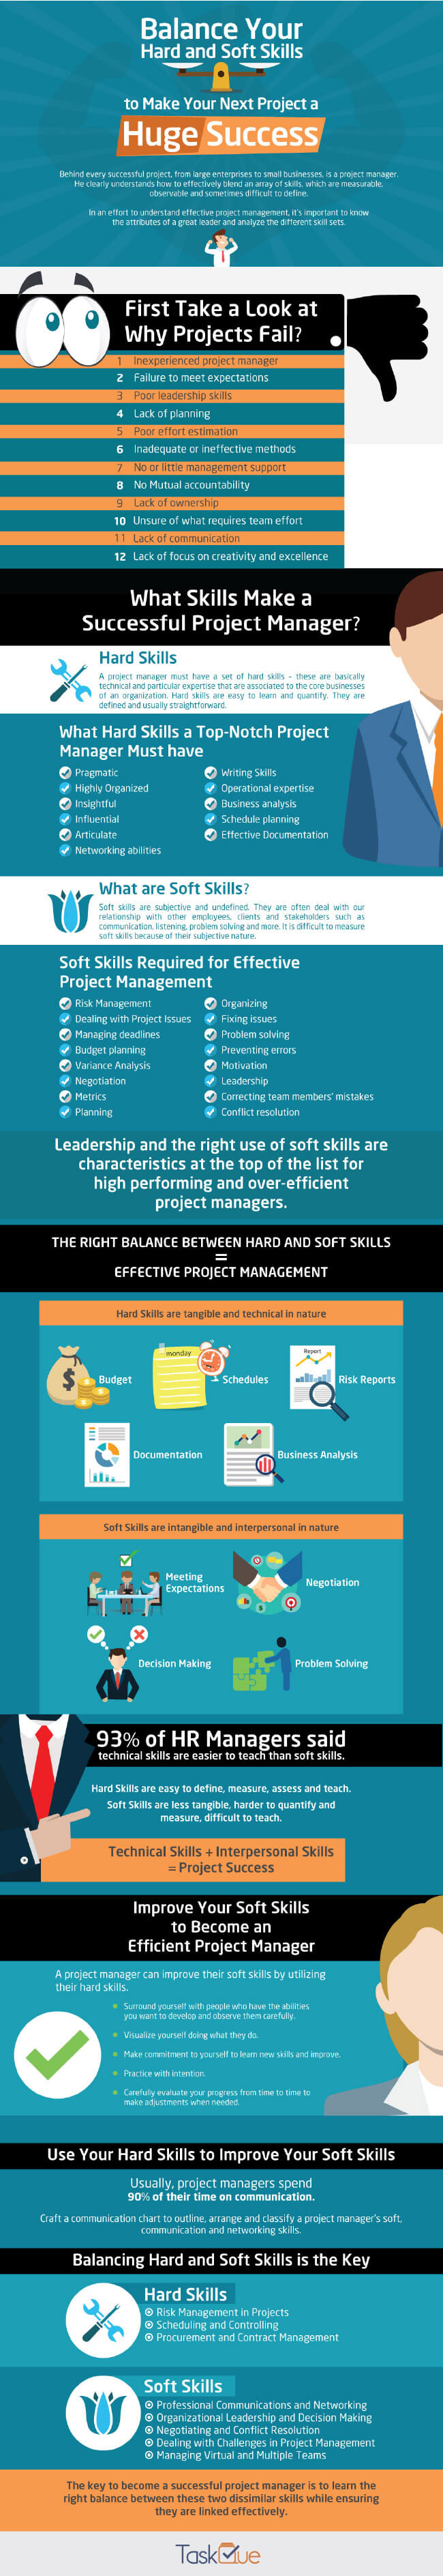 Image titled balance your hard and soft skills to make your next project a huge success